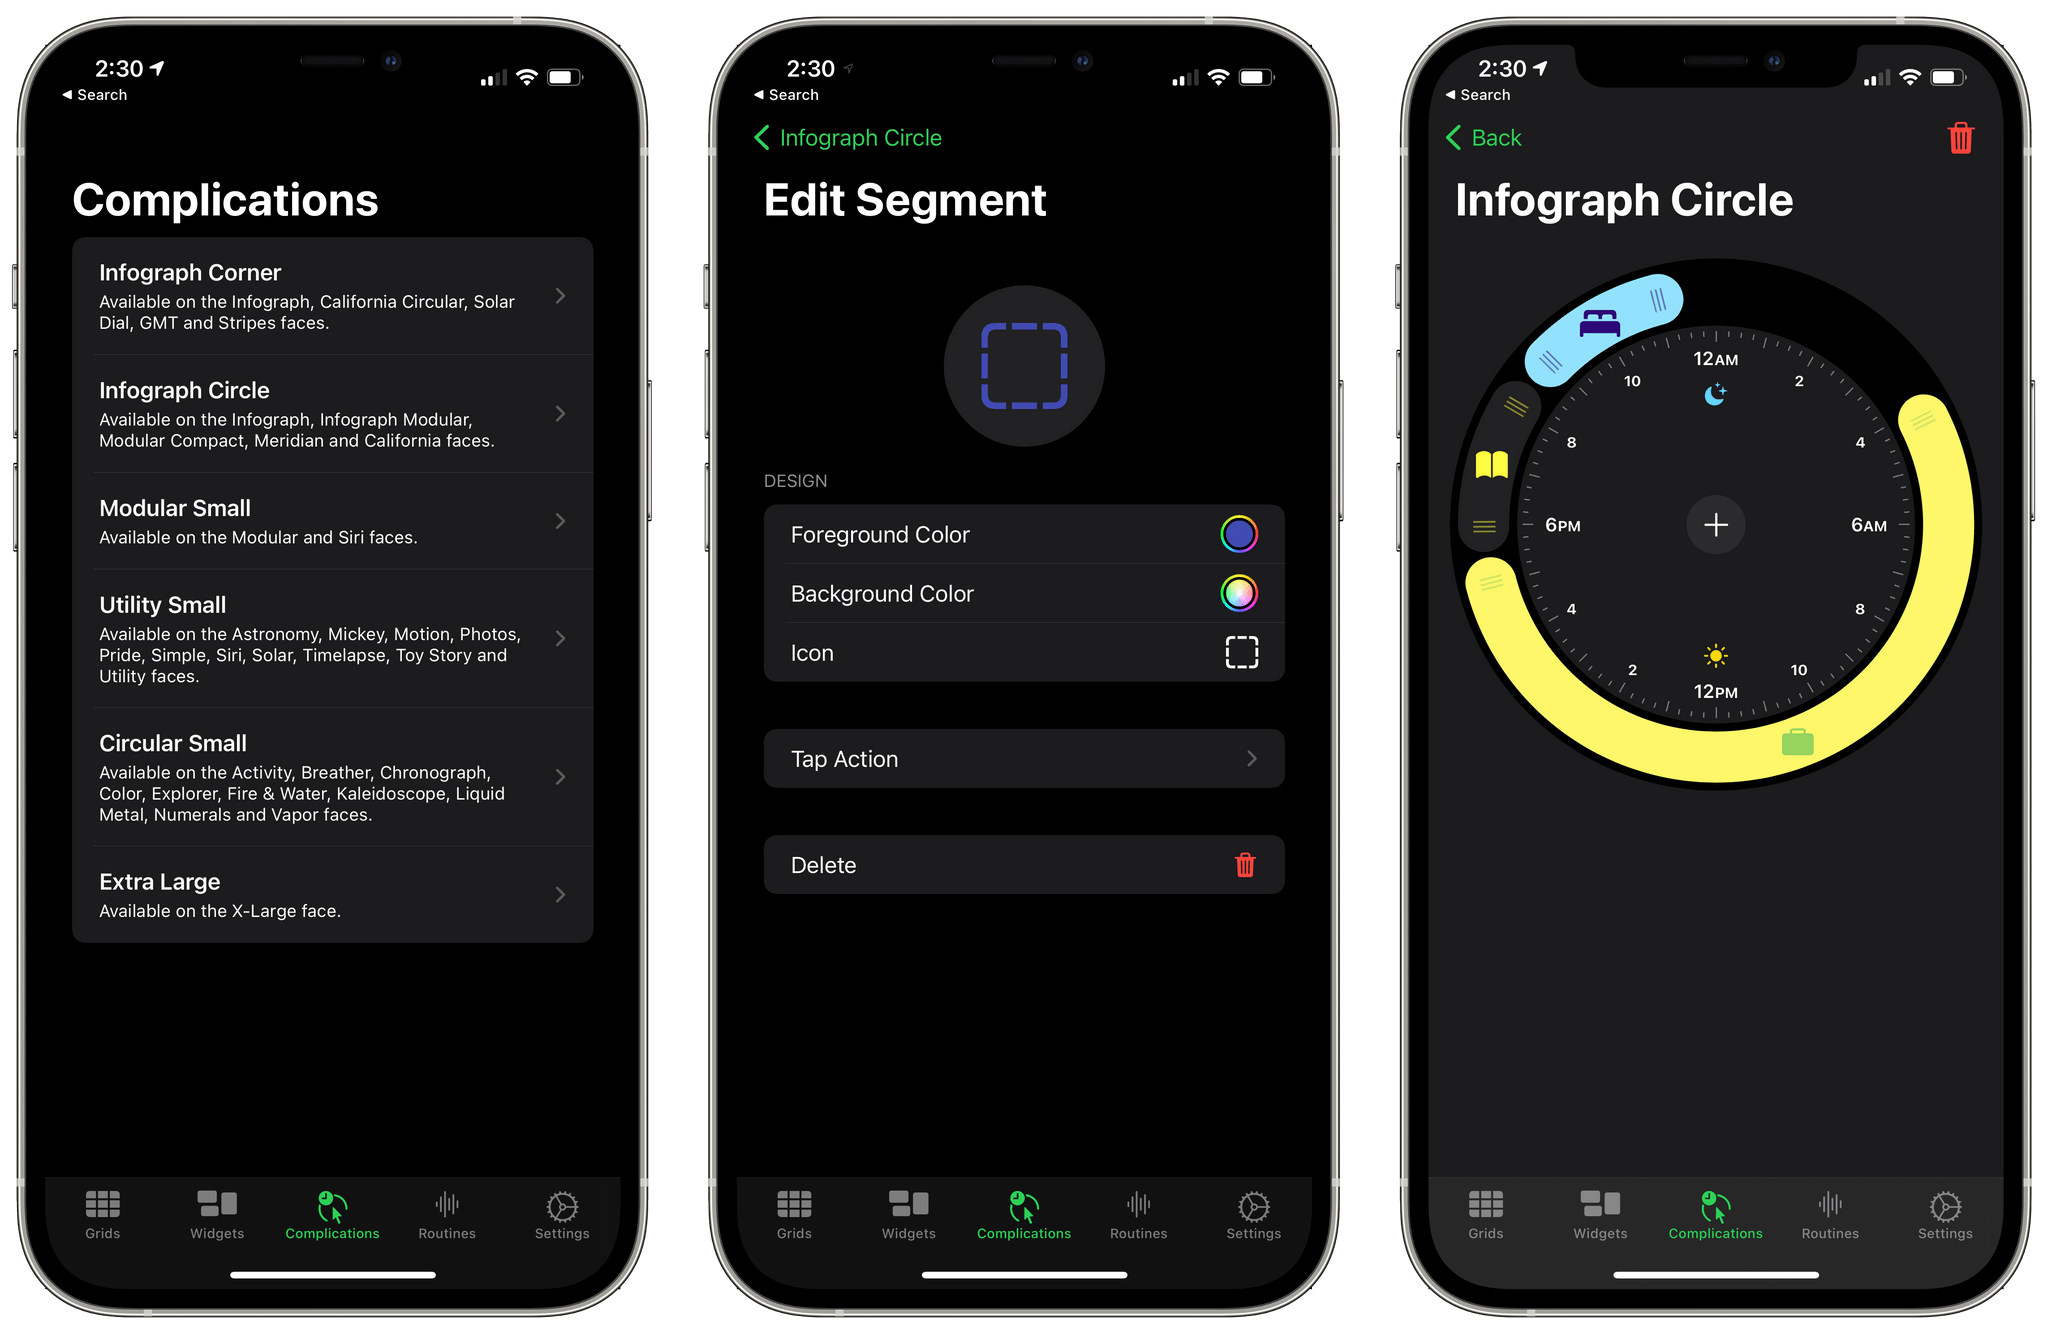 The updated complication editor UI.